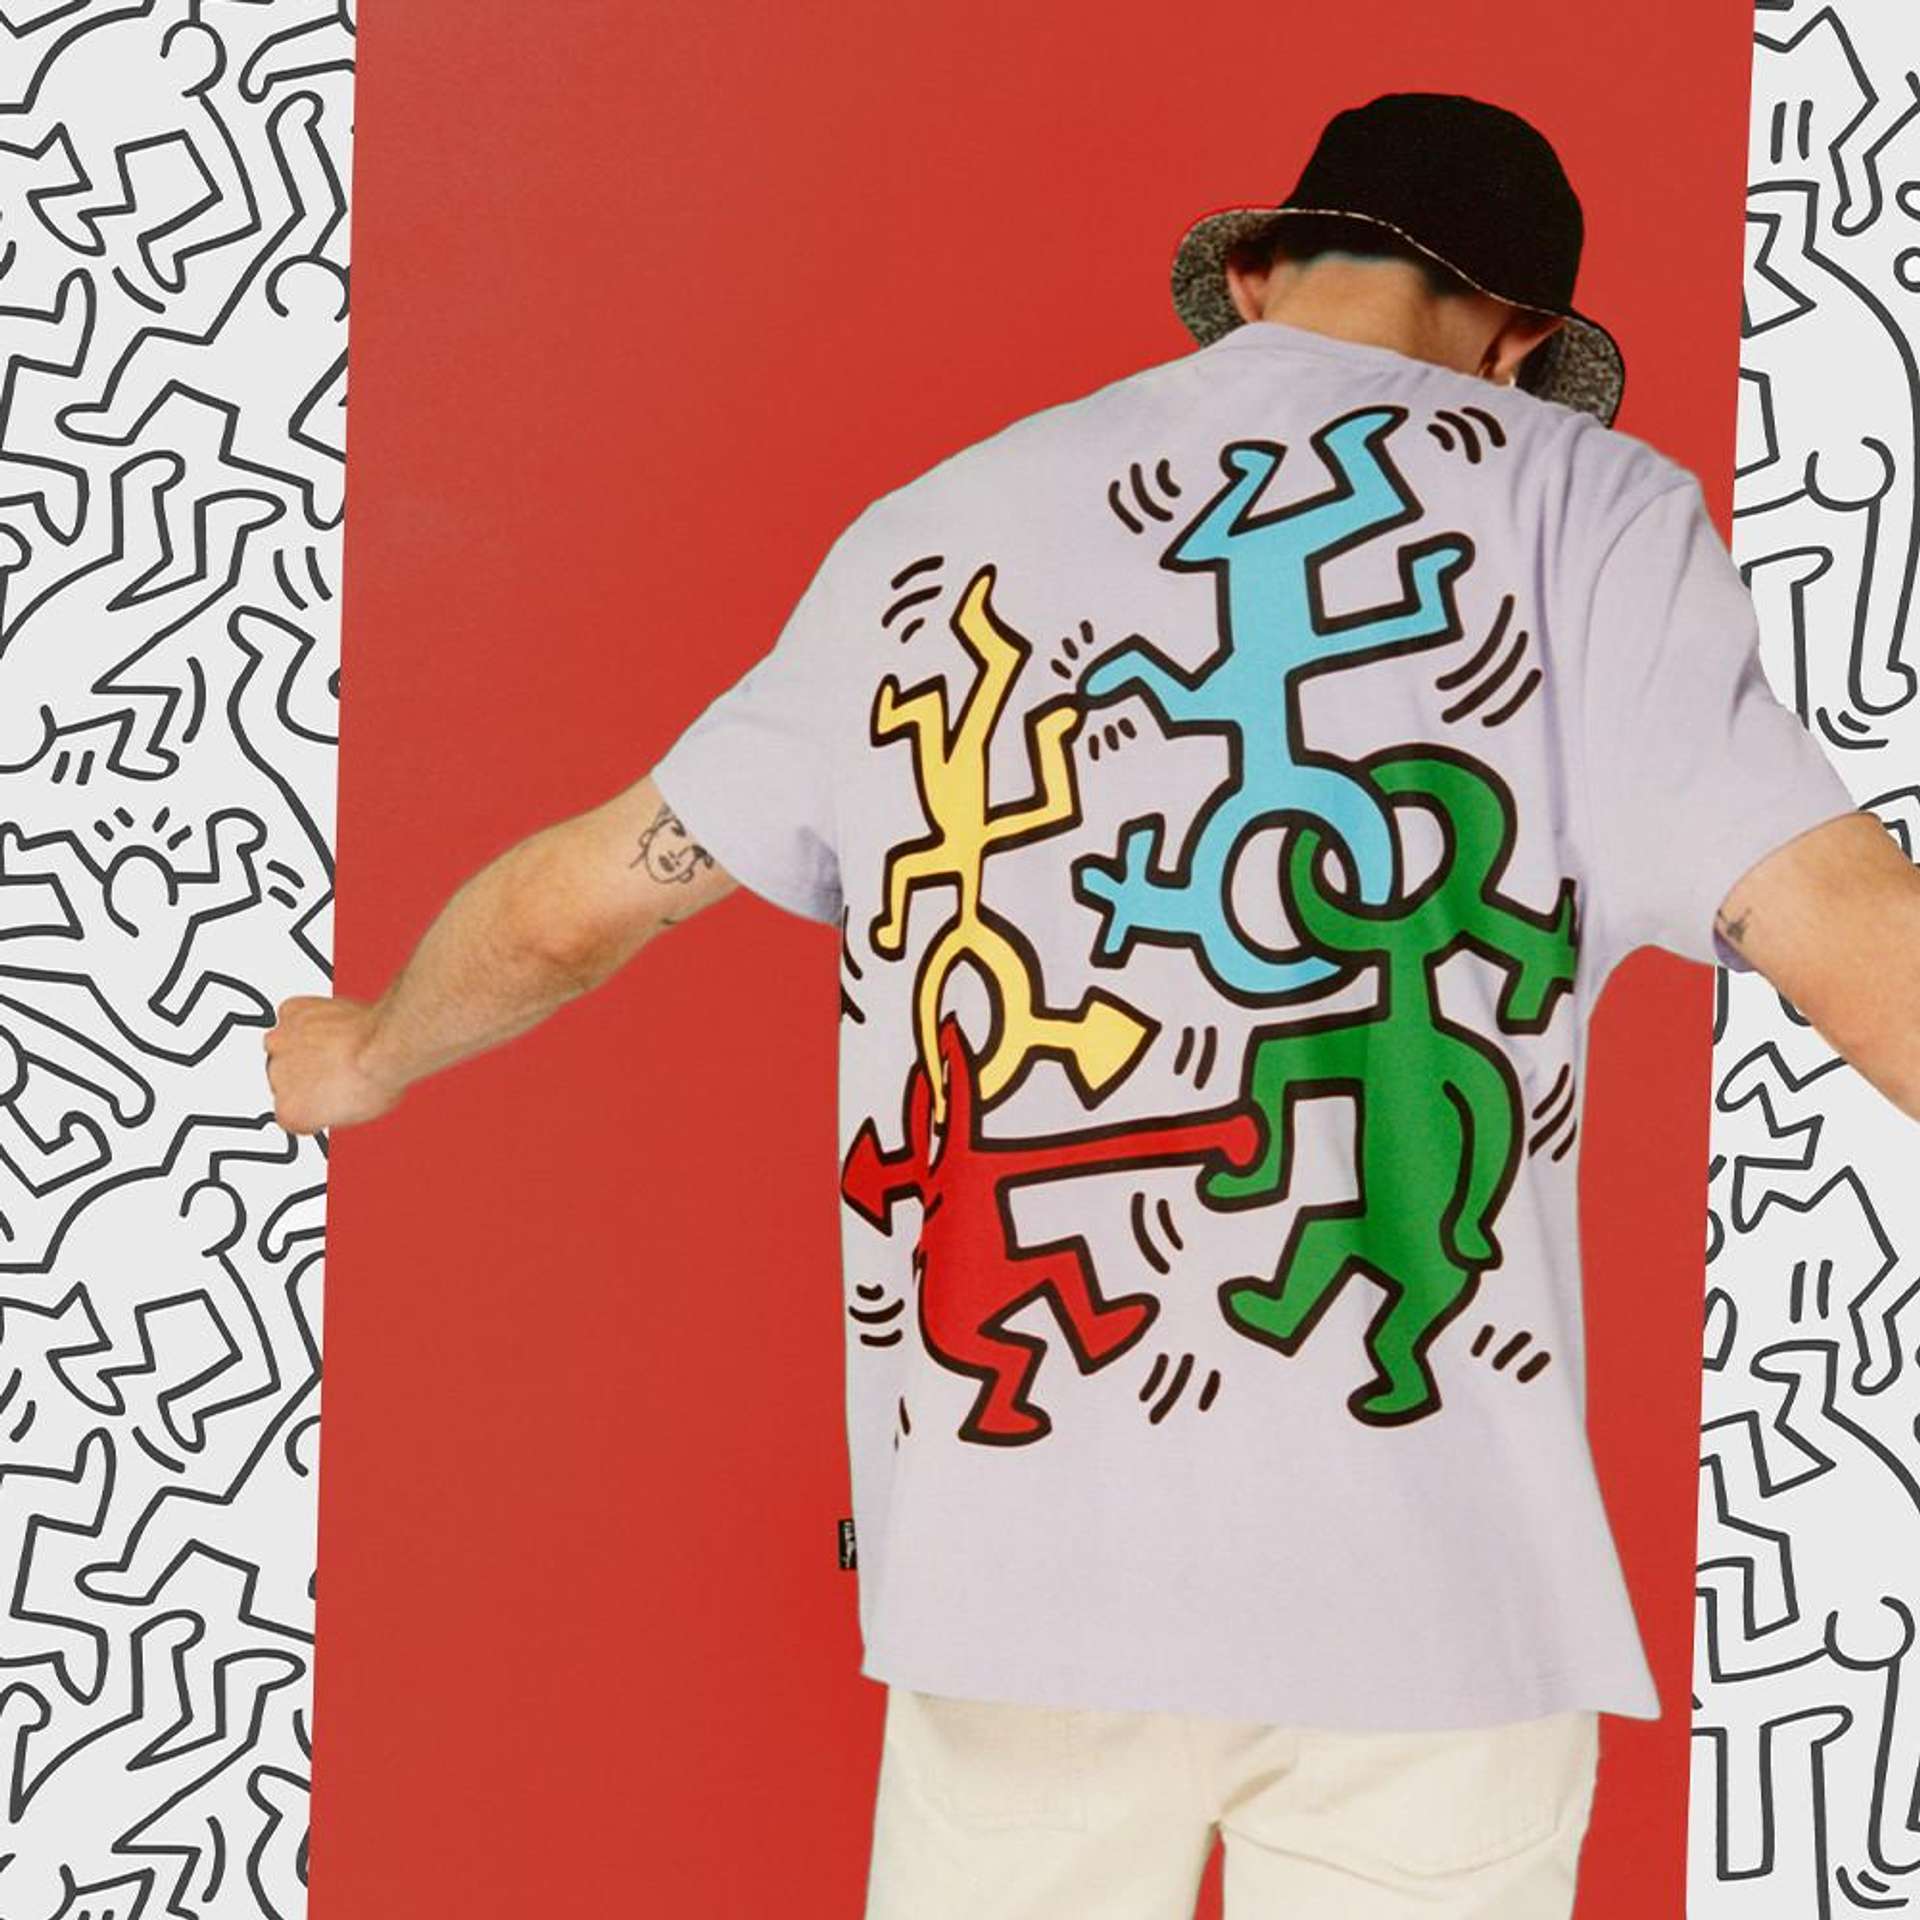 An image of a model wearing a Primark T-shirt featuring some of Keith Haring’s designs, standing against a background richly decorated with the artist’s signature silhouettes.